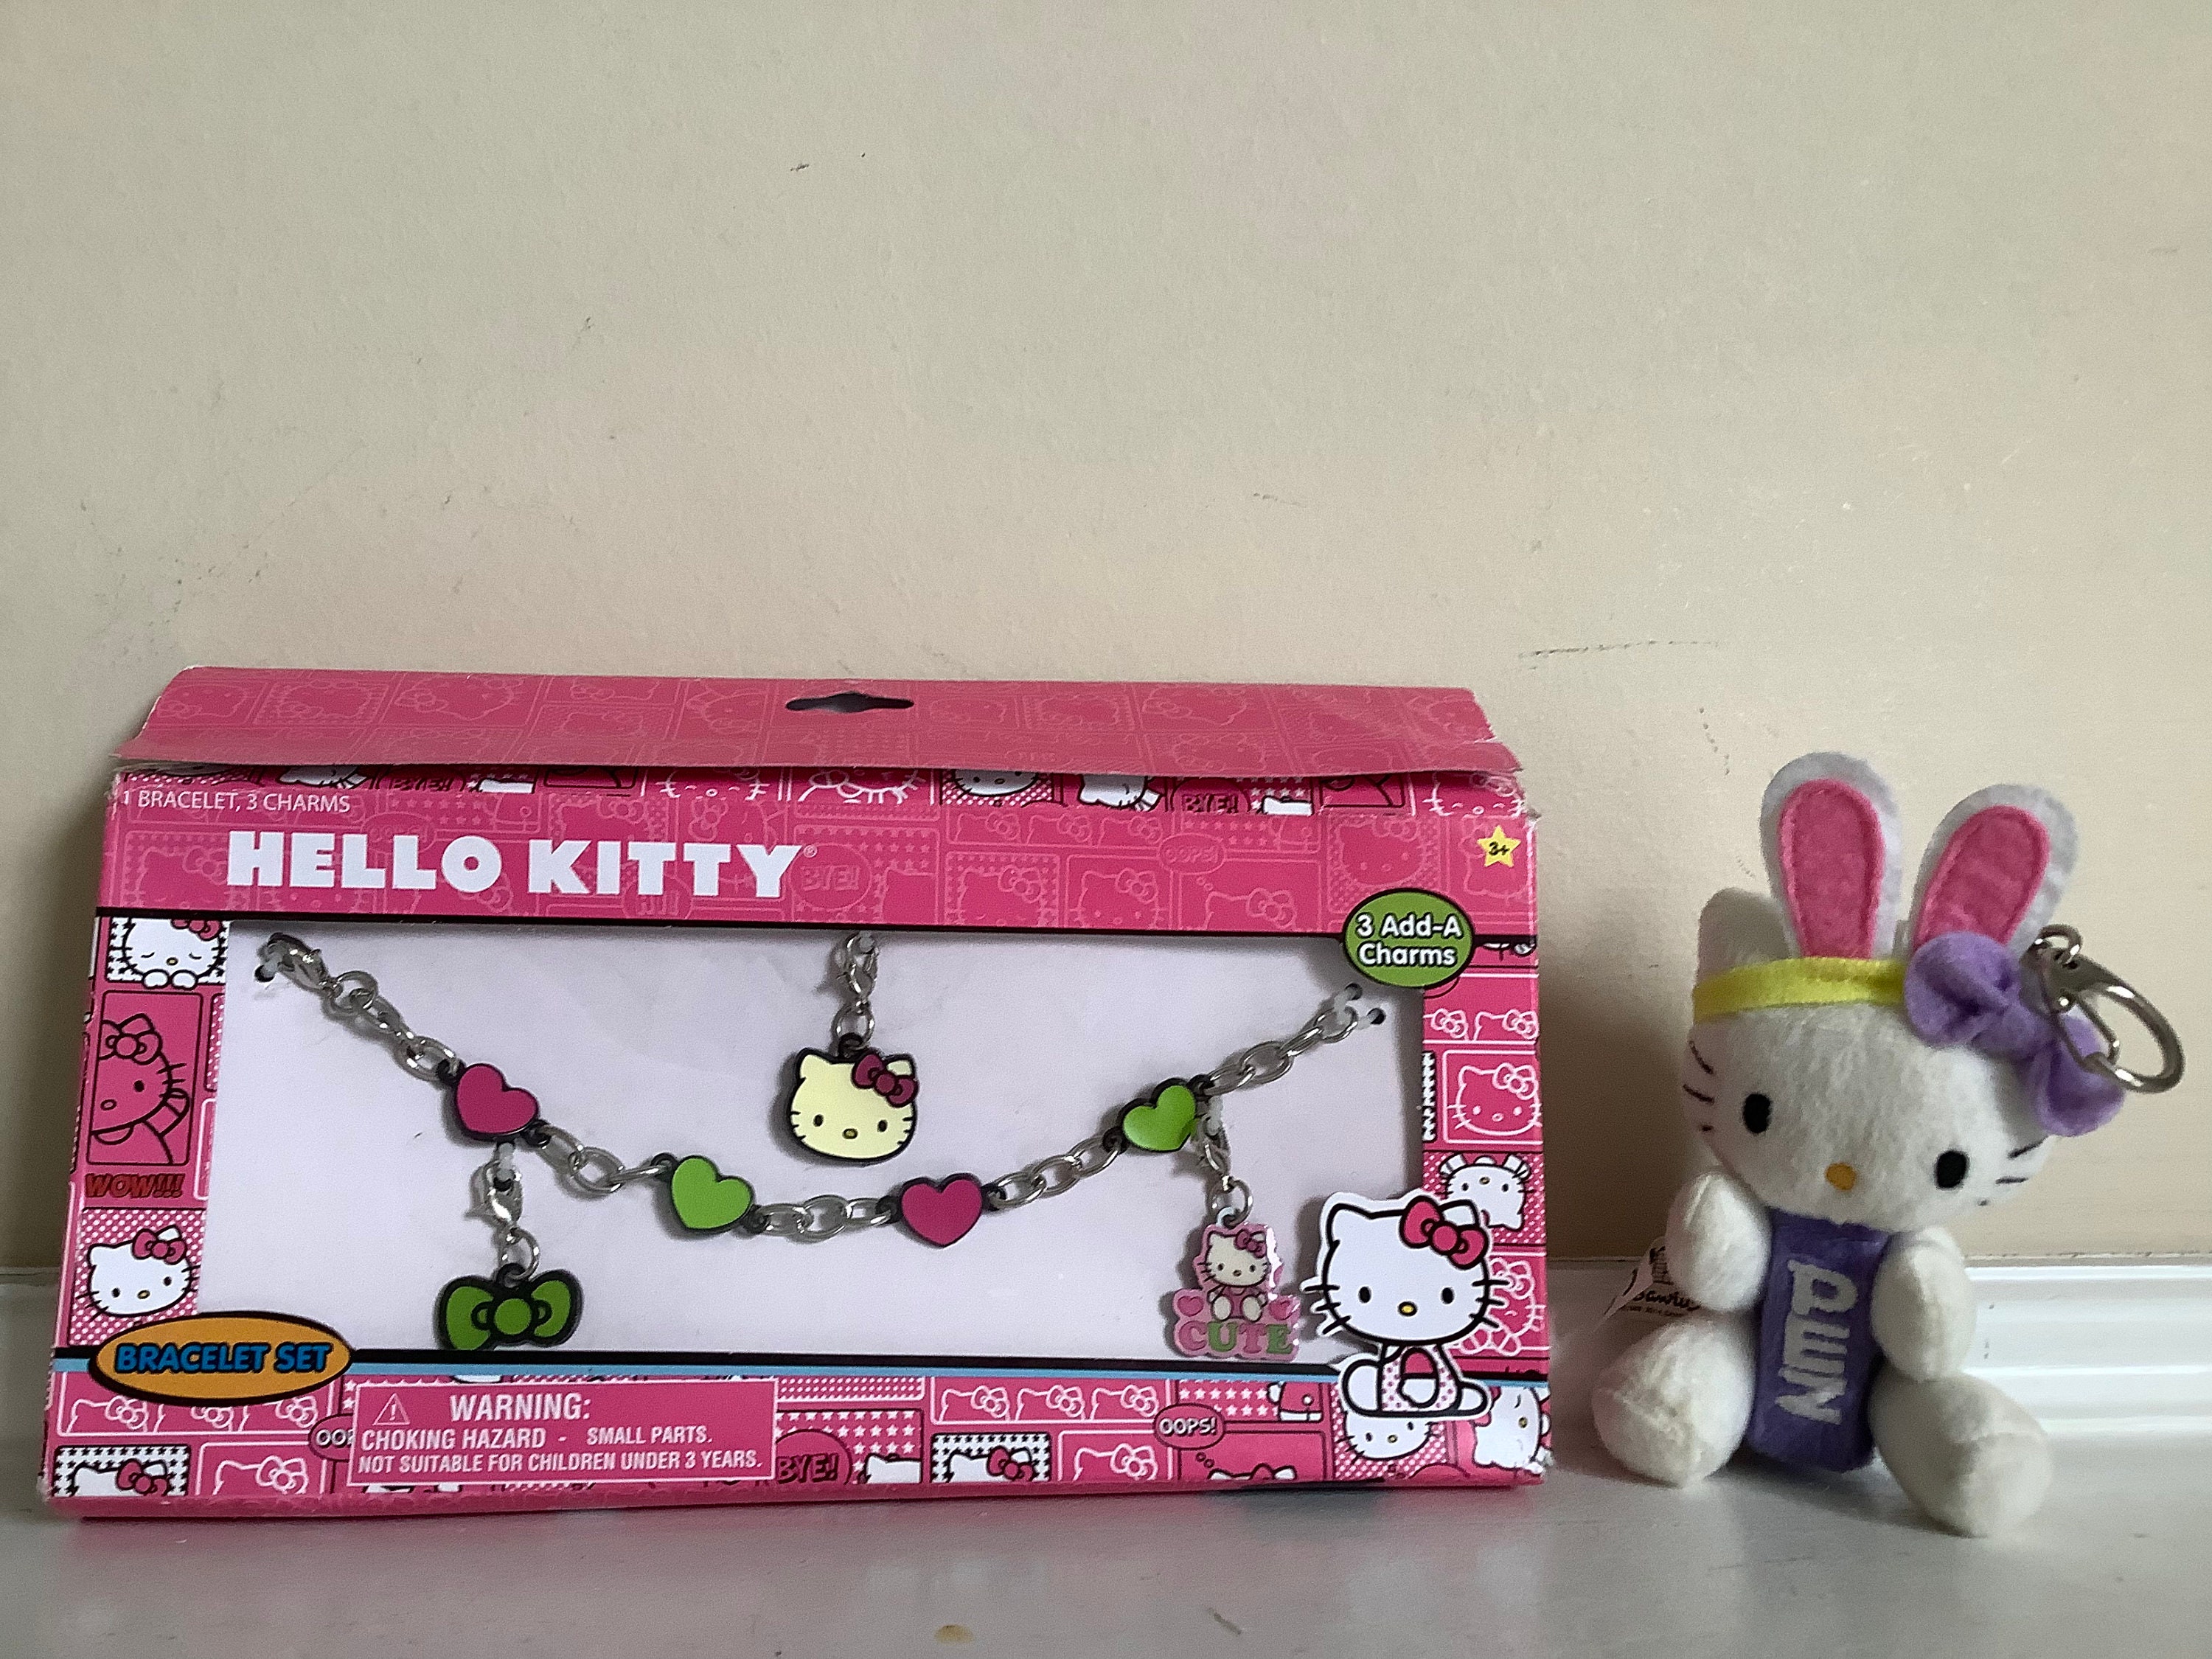 A New Vtg Hello Kitty 3 Charms With Green and Pink Hearts 